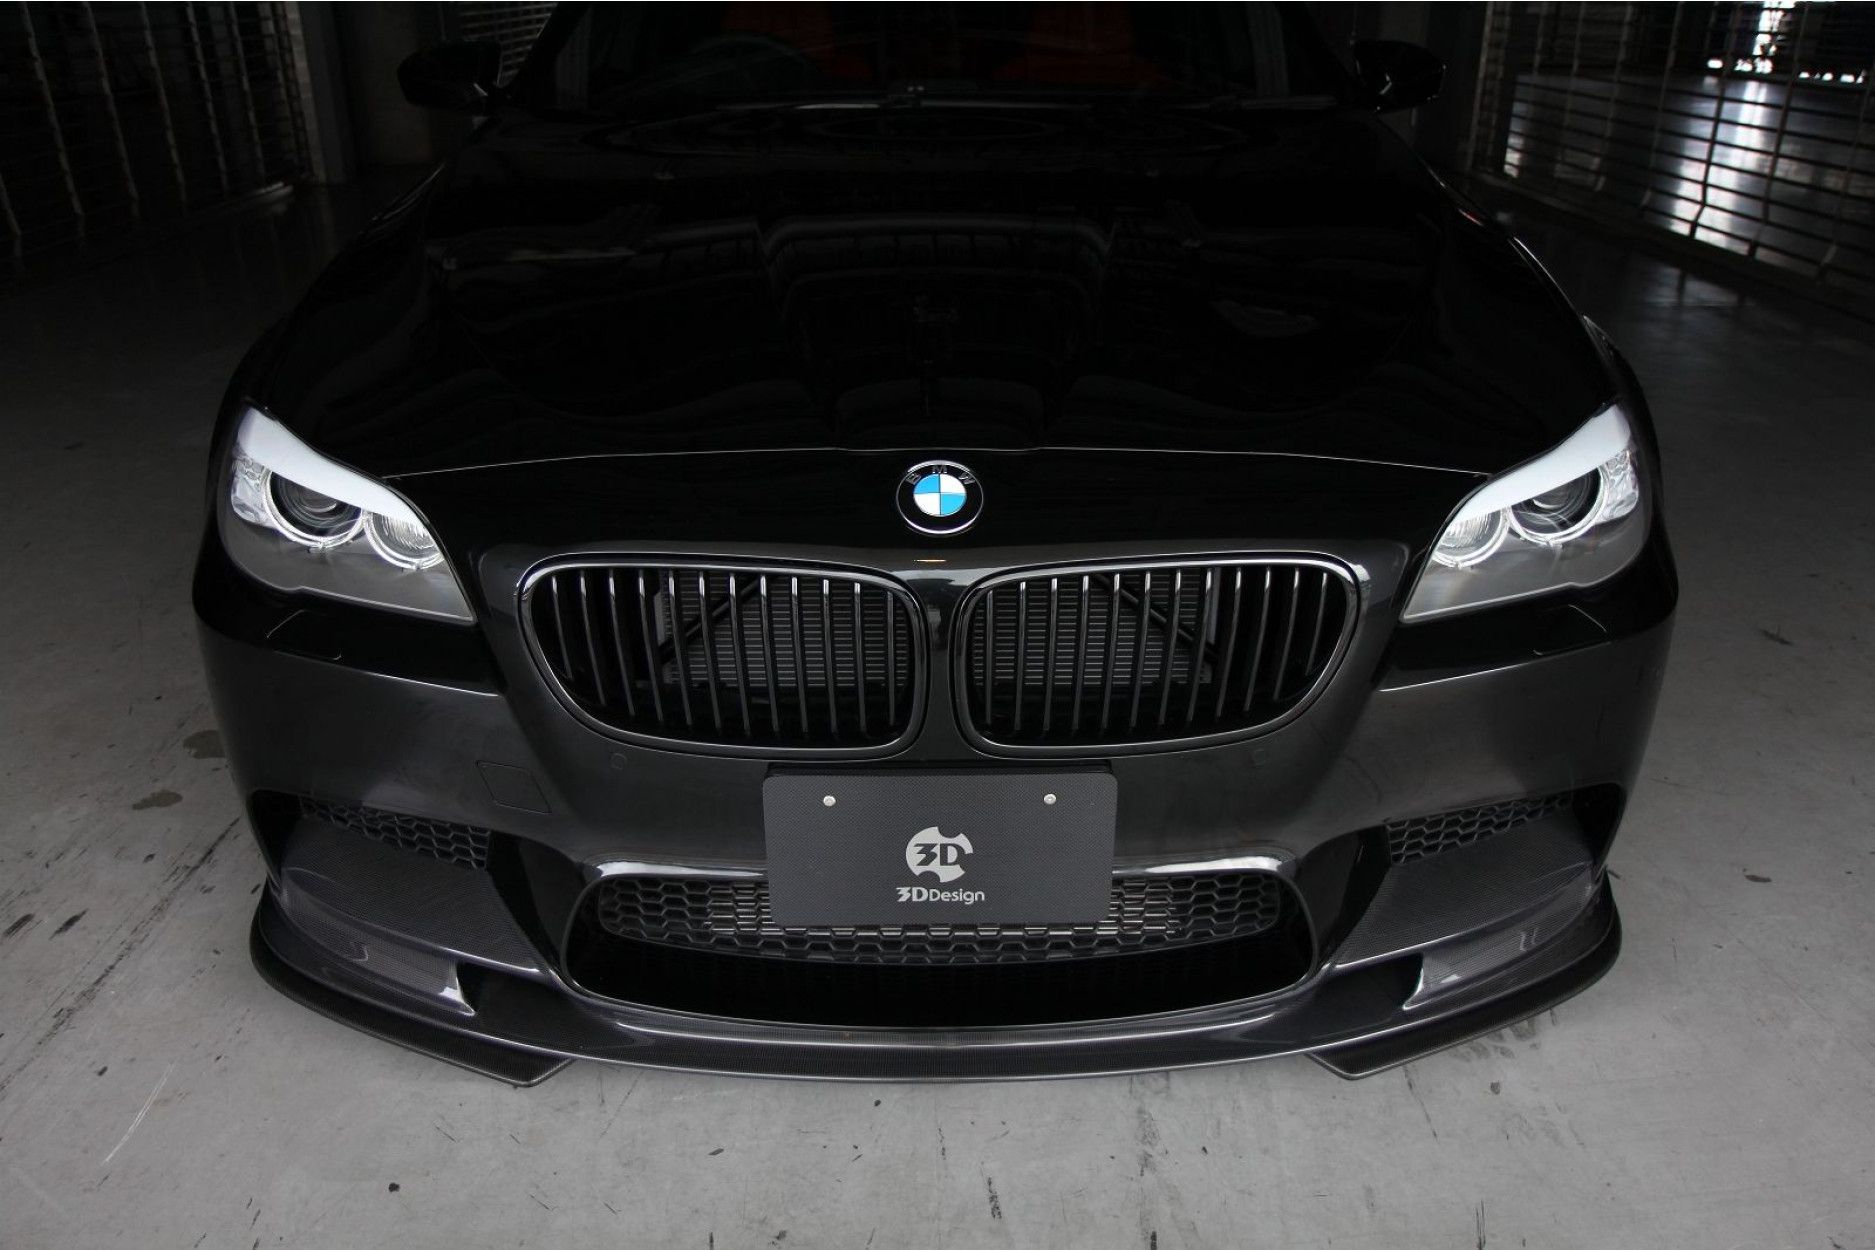 3Ddesign carbon front lip front splitter for BMW 5 Series F10 M5 for (3) 